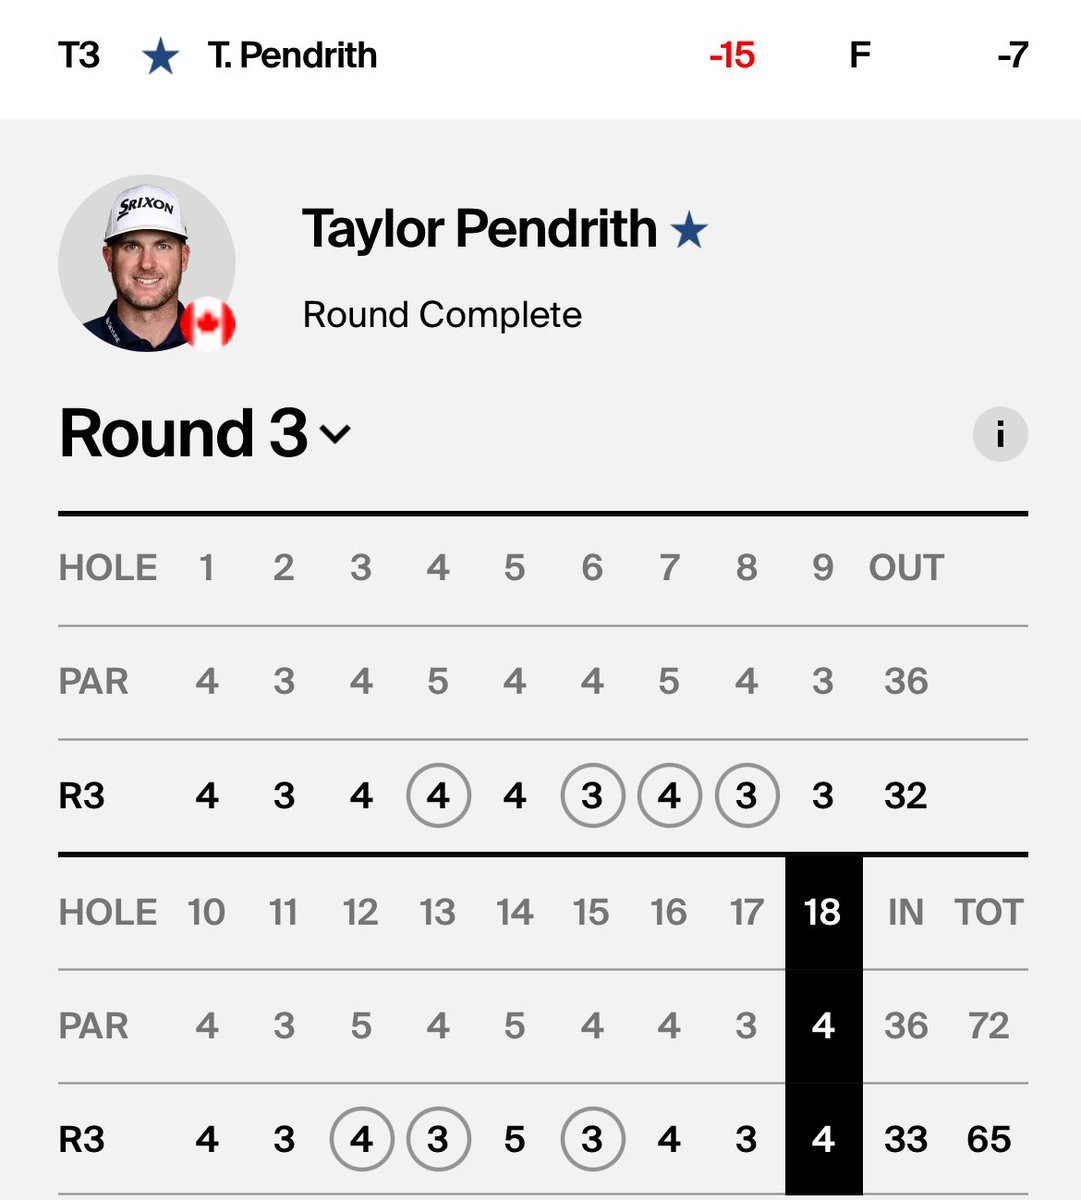 🇨🇦 ⁦@TaylorPendrith⁩ 2 back headed into Sunday at the ⁦@CoralesChamp⁩ in the Dominican Republic